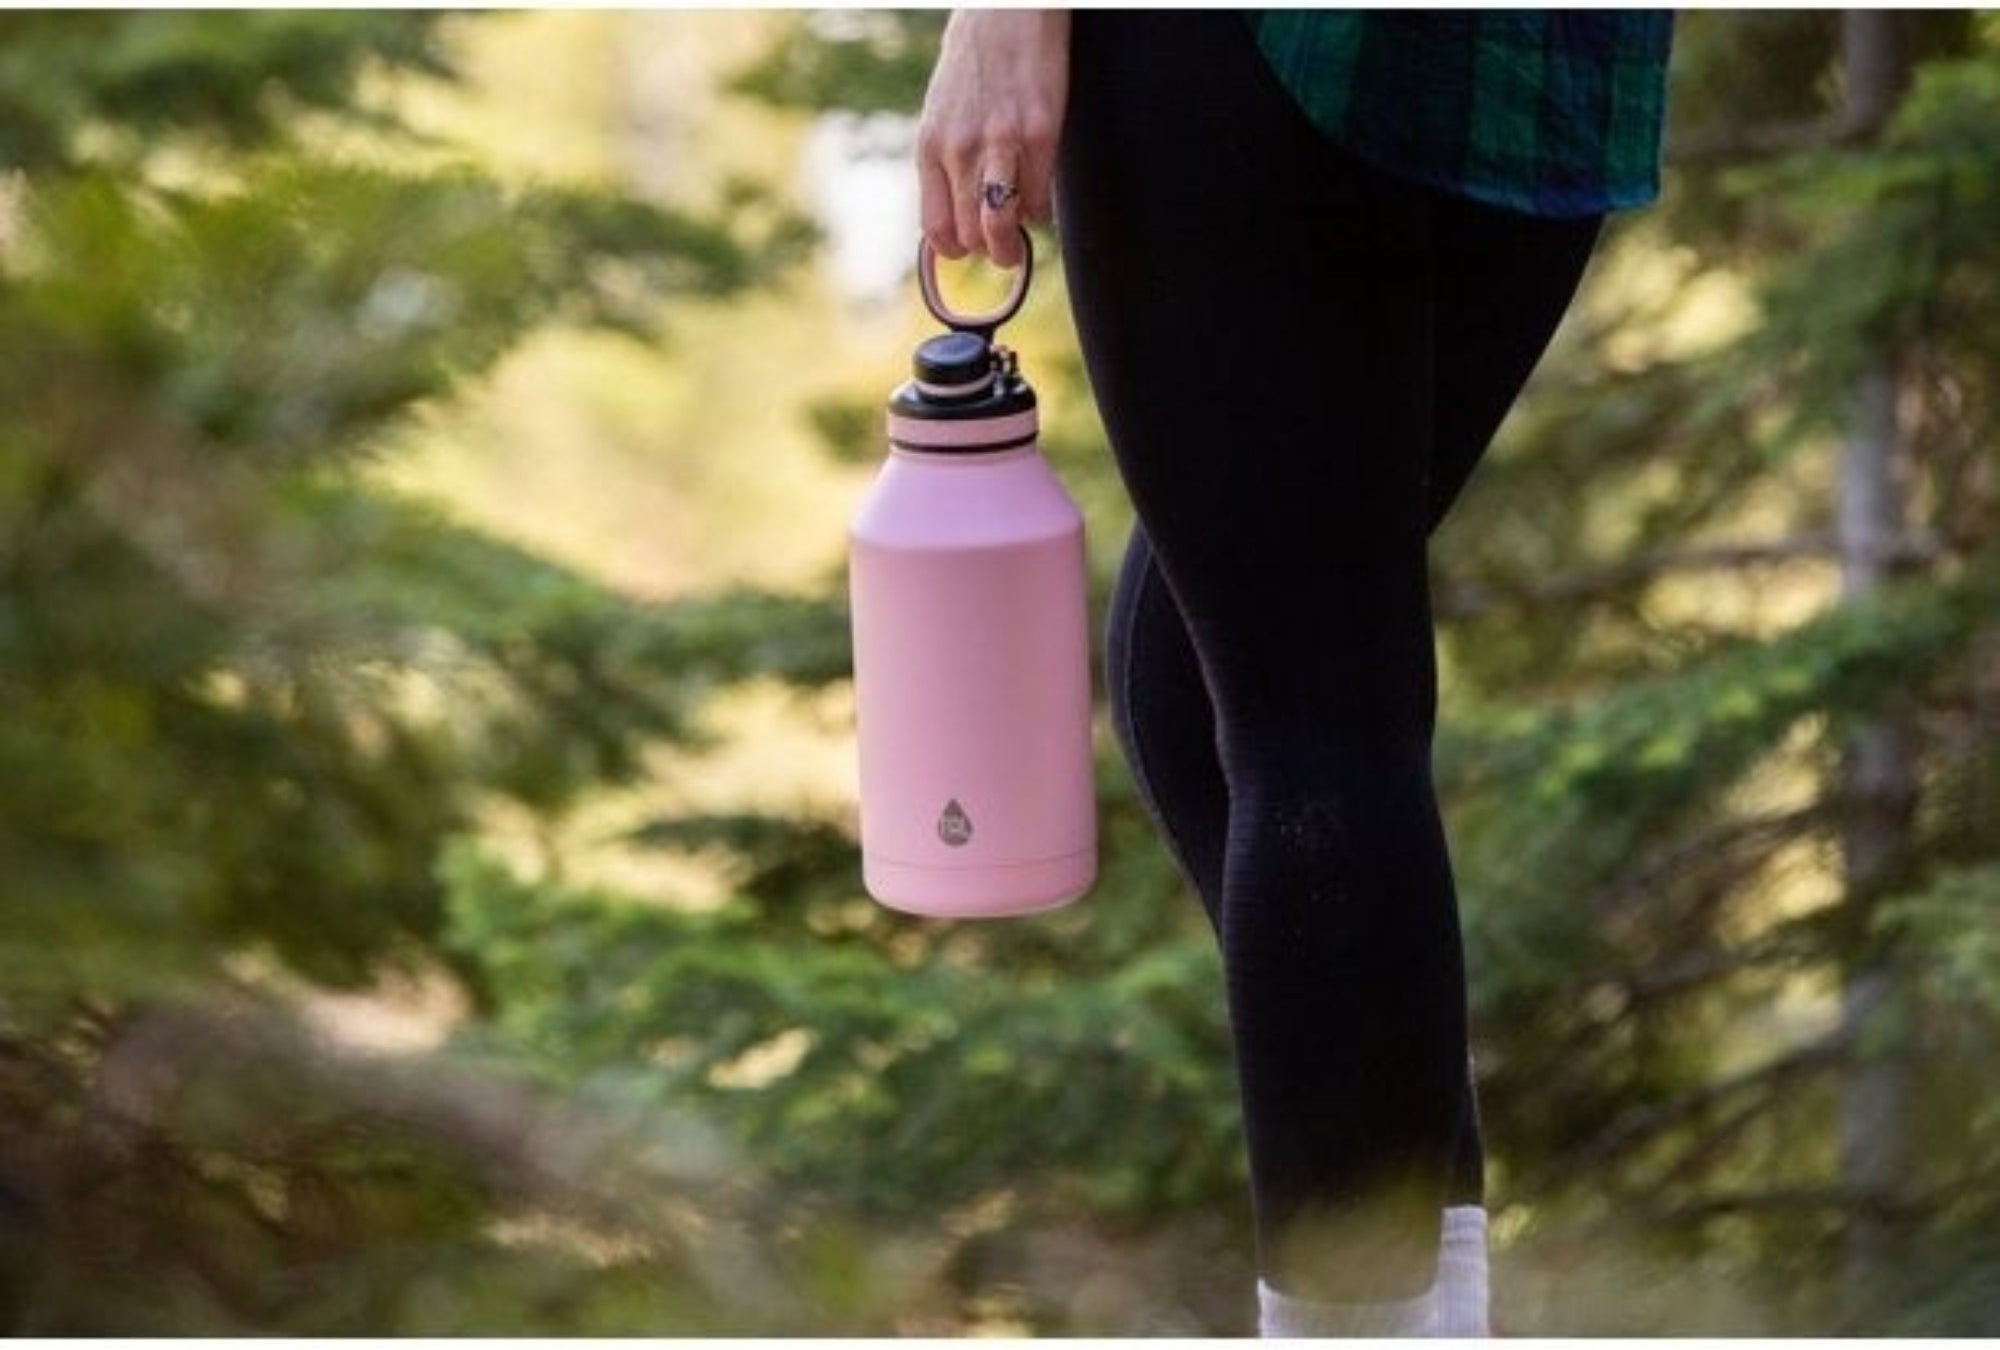 Model holding pink bottle in the outdoors